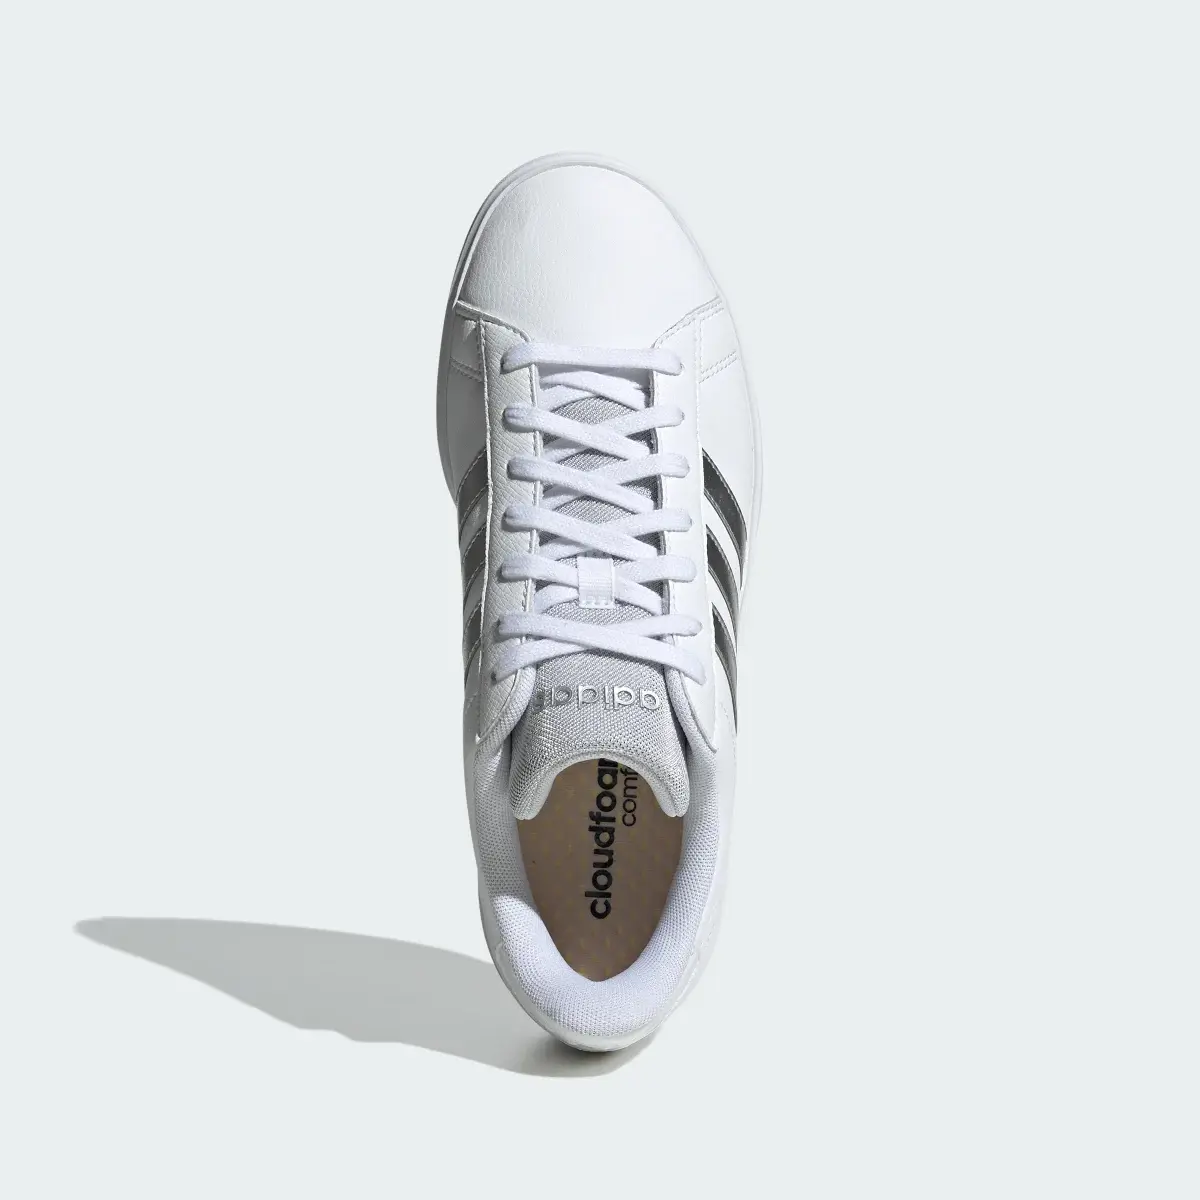 Adidas Grand Court 2.0 Shoes. 3